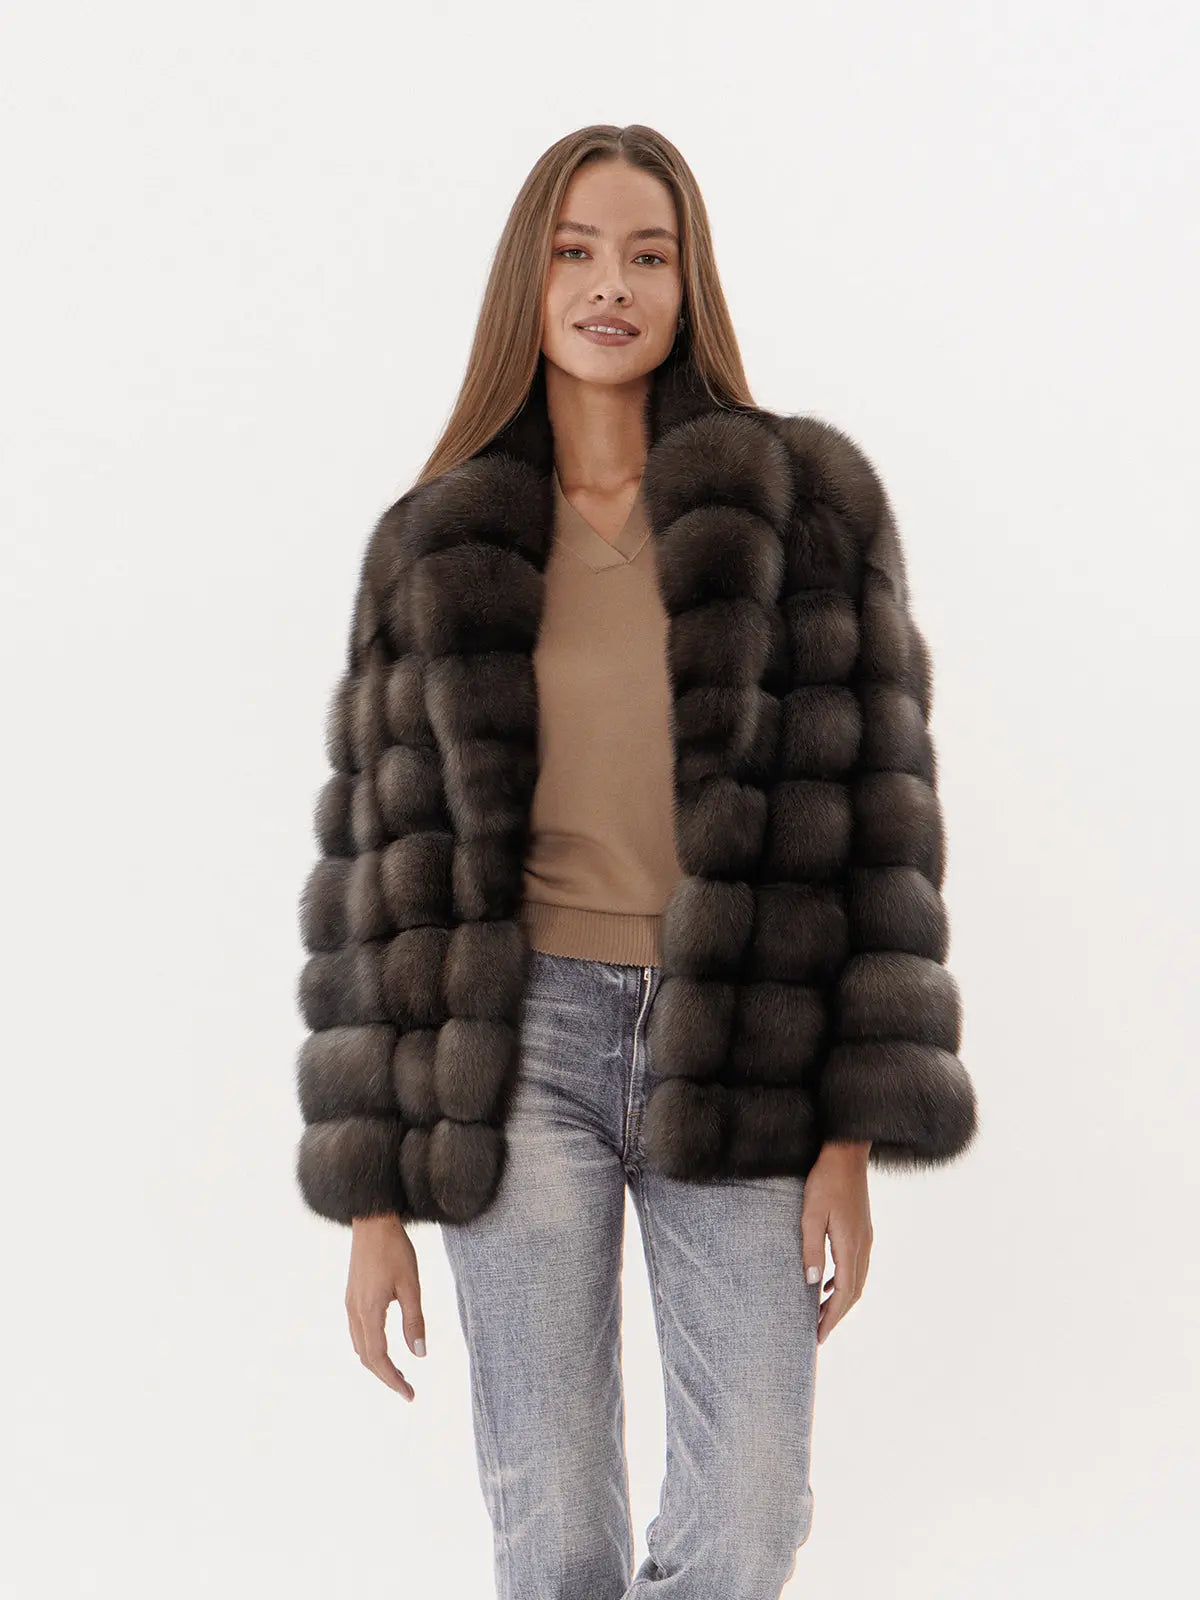 Sable fur coat with shawl collar for women